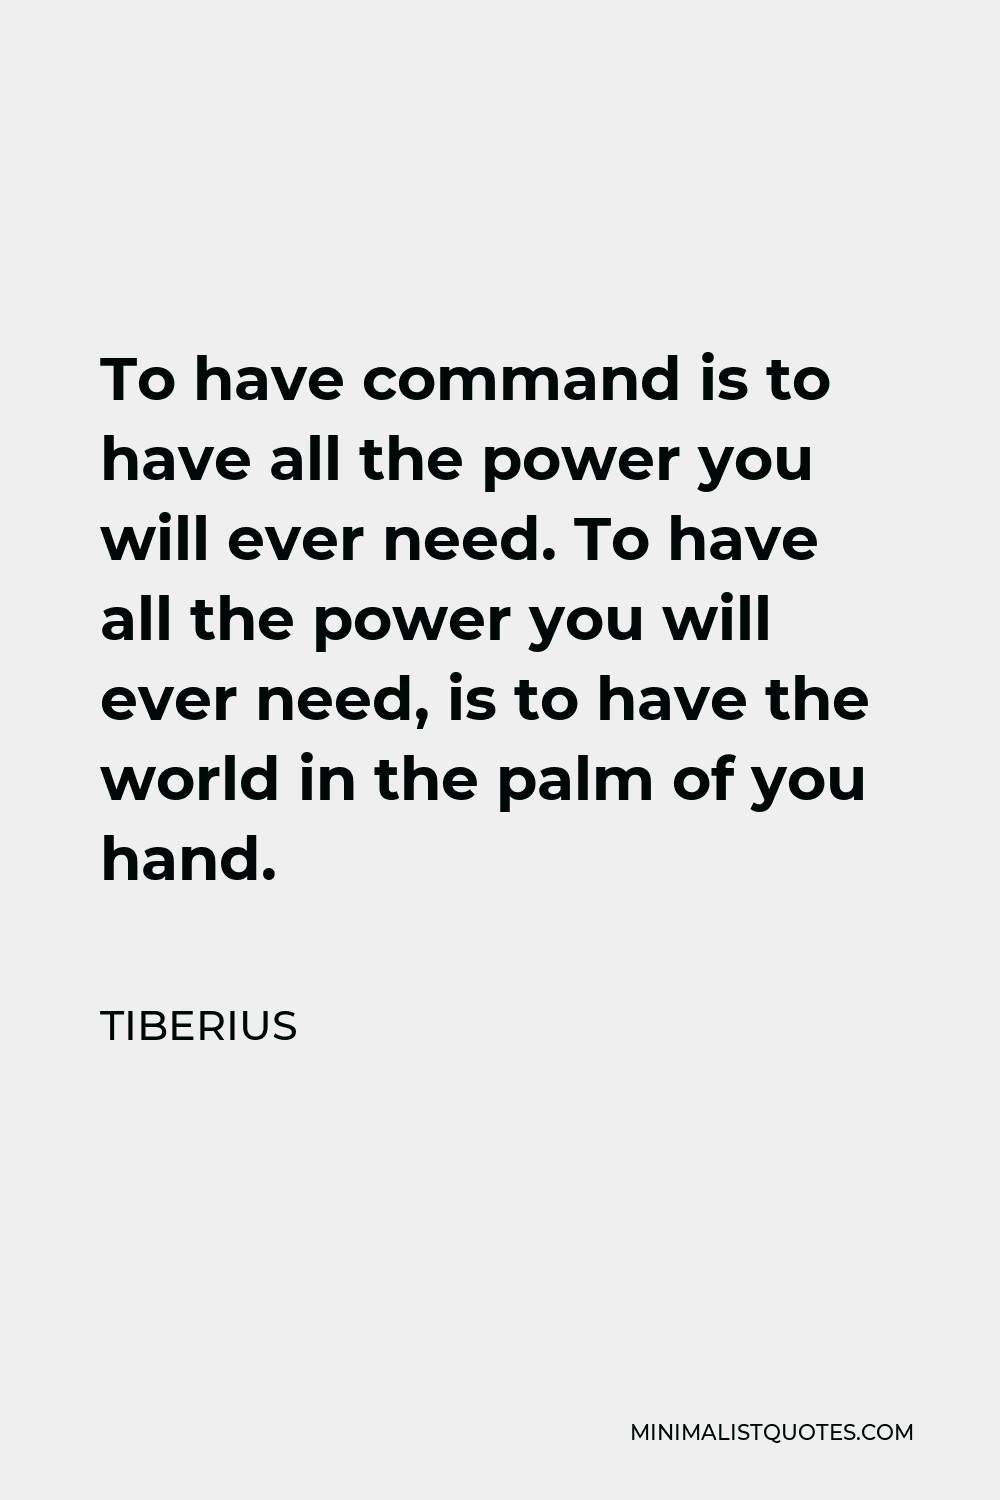 Tiberius Quote - To have command is to have all the power you will ever need. To have all the power you will ever need, is to have the world in the palm of you hand.